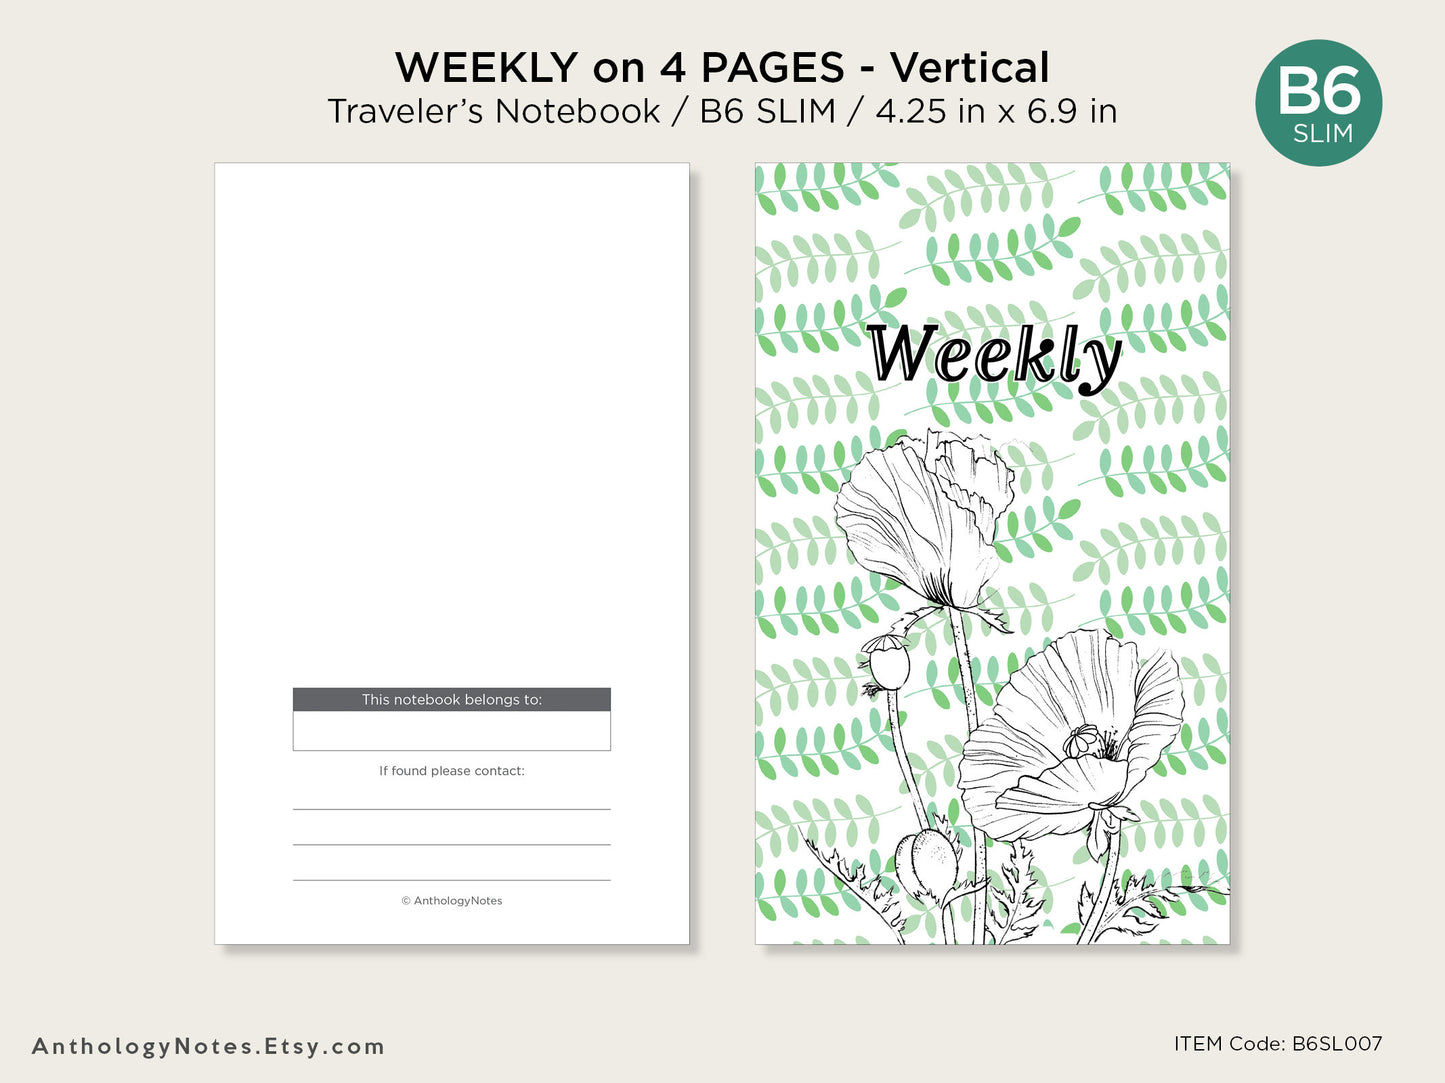 B6 SLIM Weekly on 4 Pages Vertical Traveler's Notebook - Wo4P -  Minimalist - With Weekly Tracker